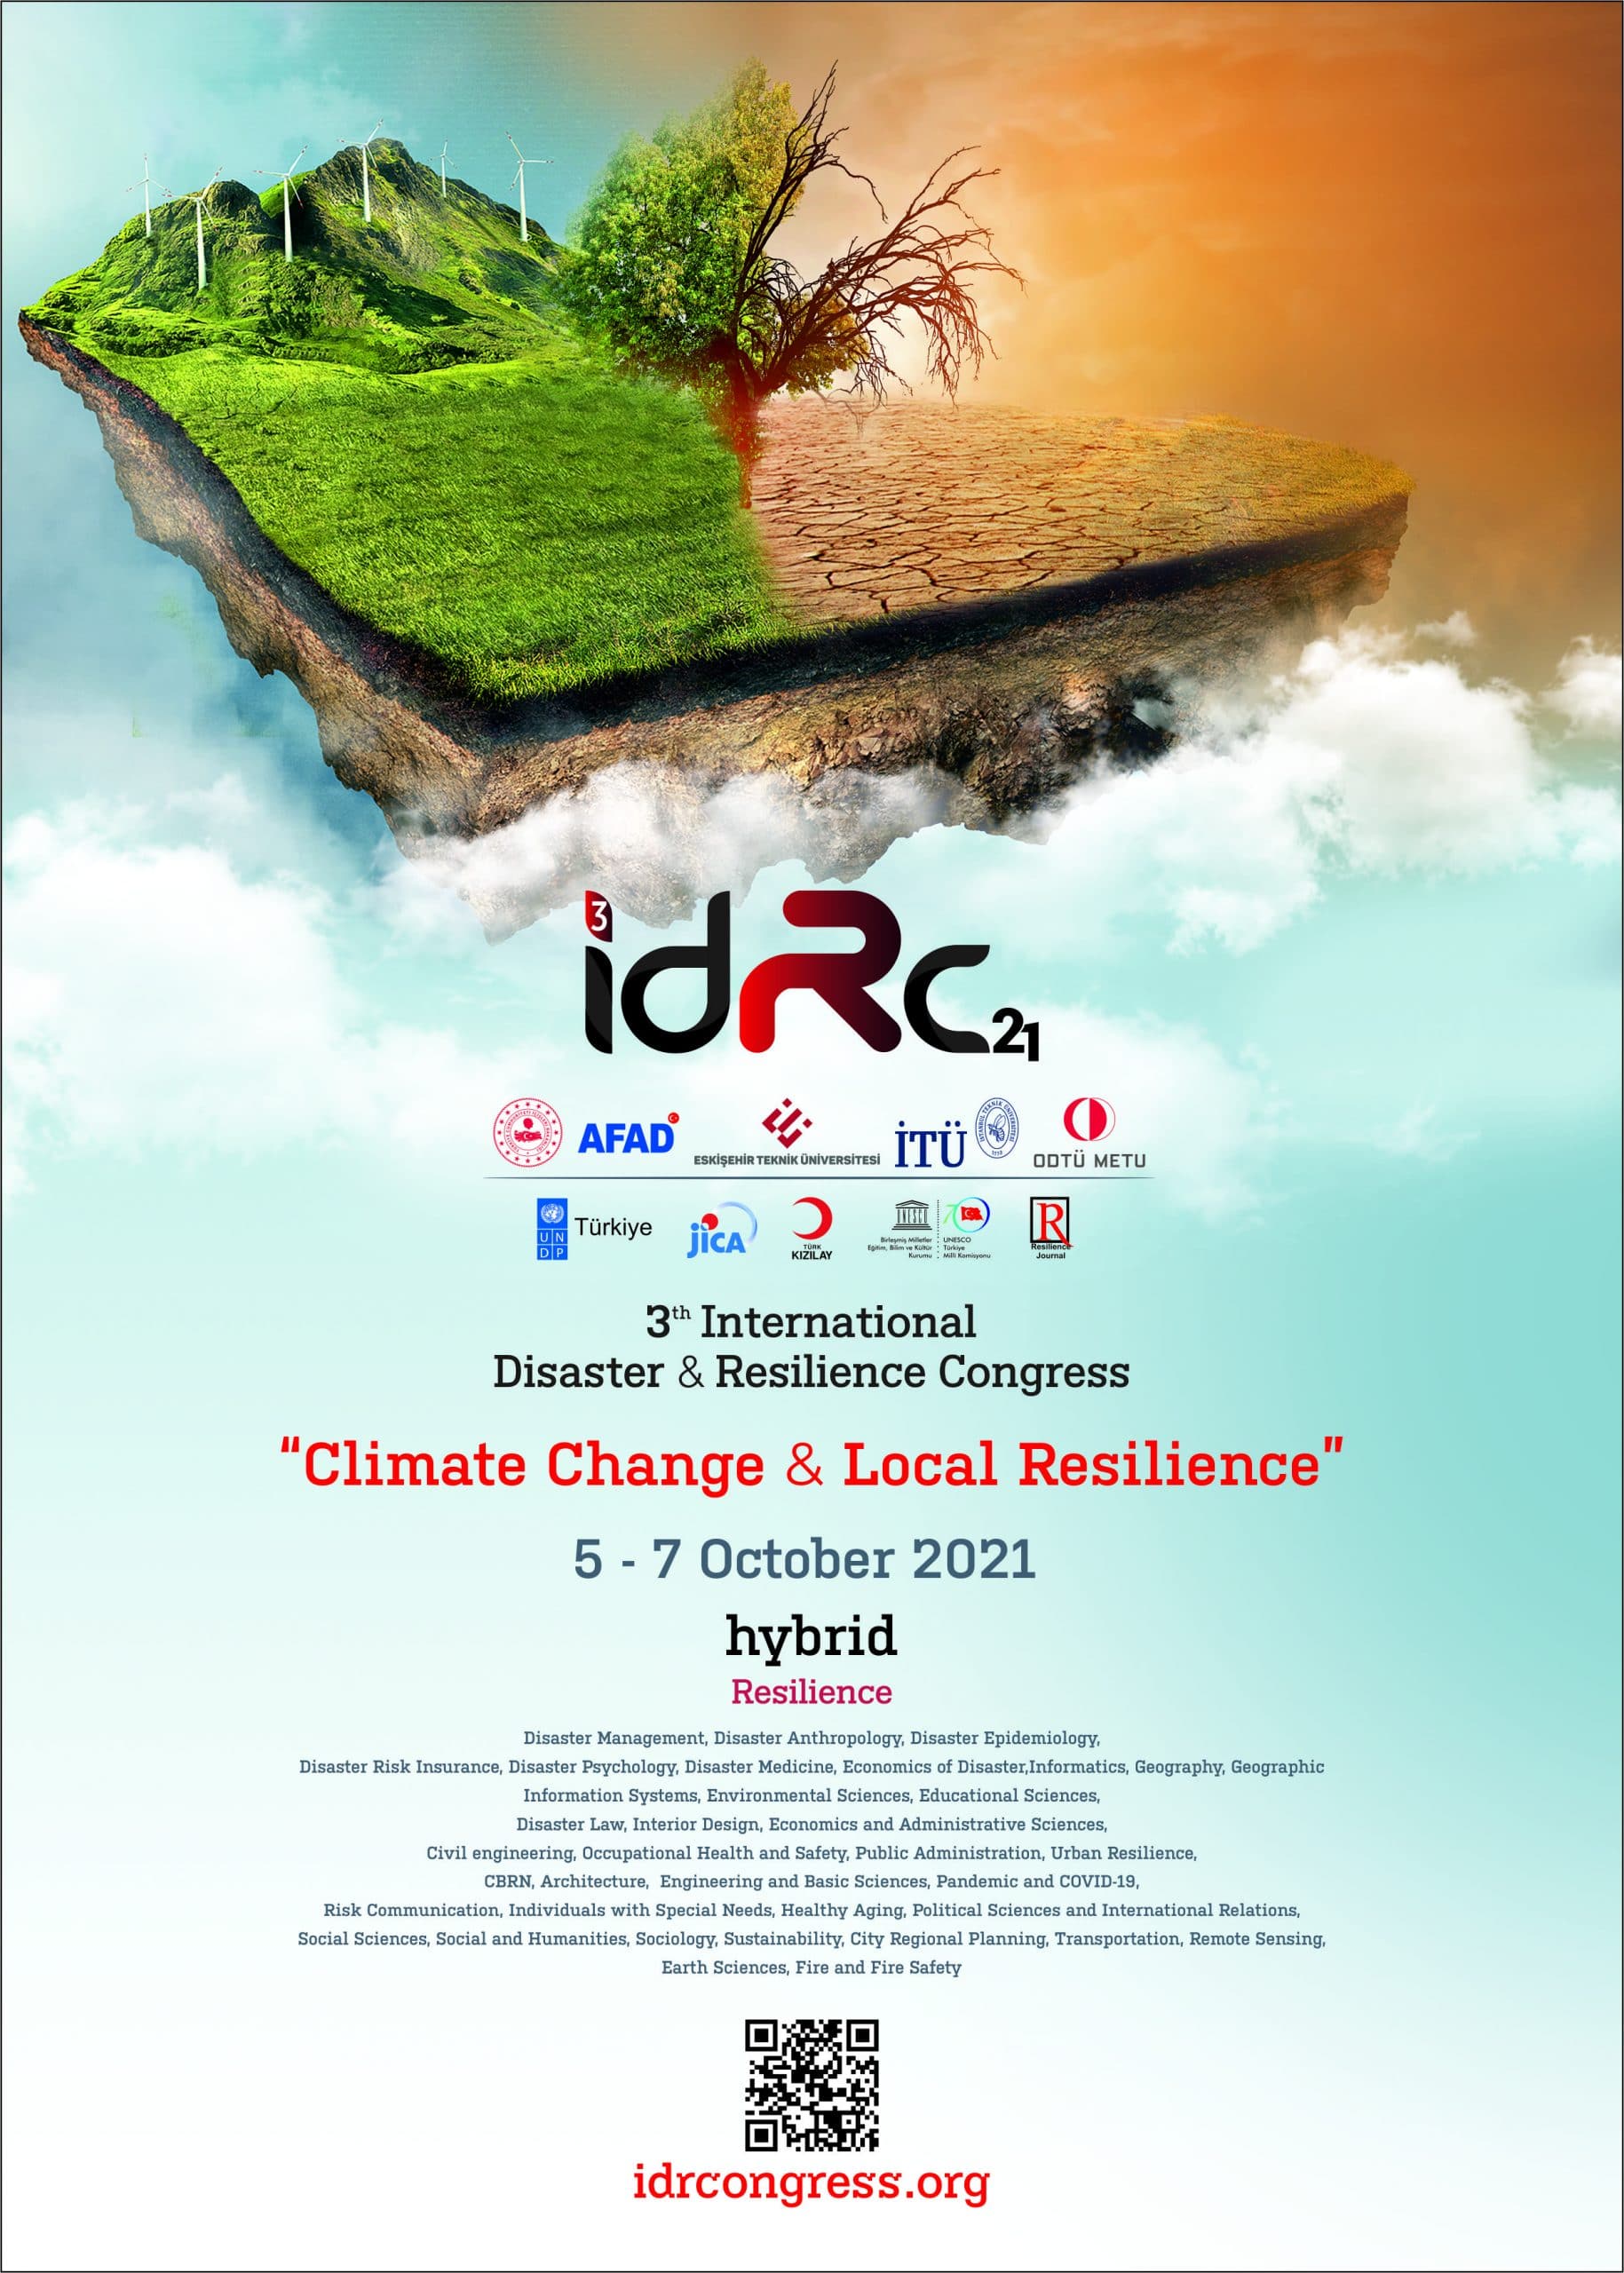 3th International Disaster and Resilience Congress “Climate Change & Local Resilience”